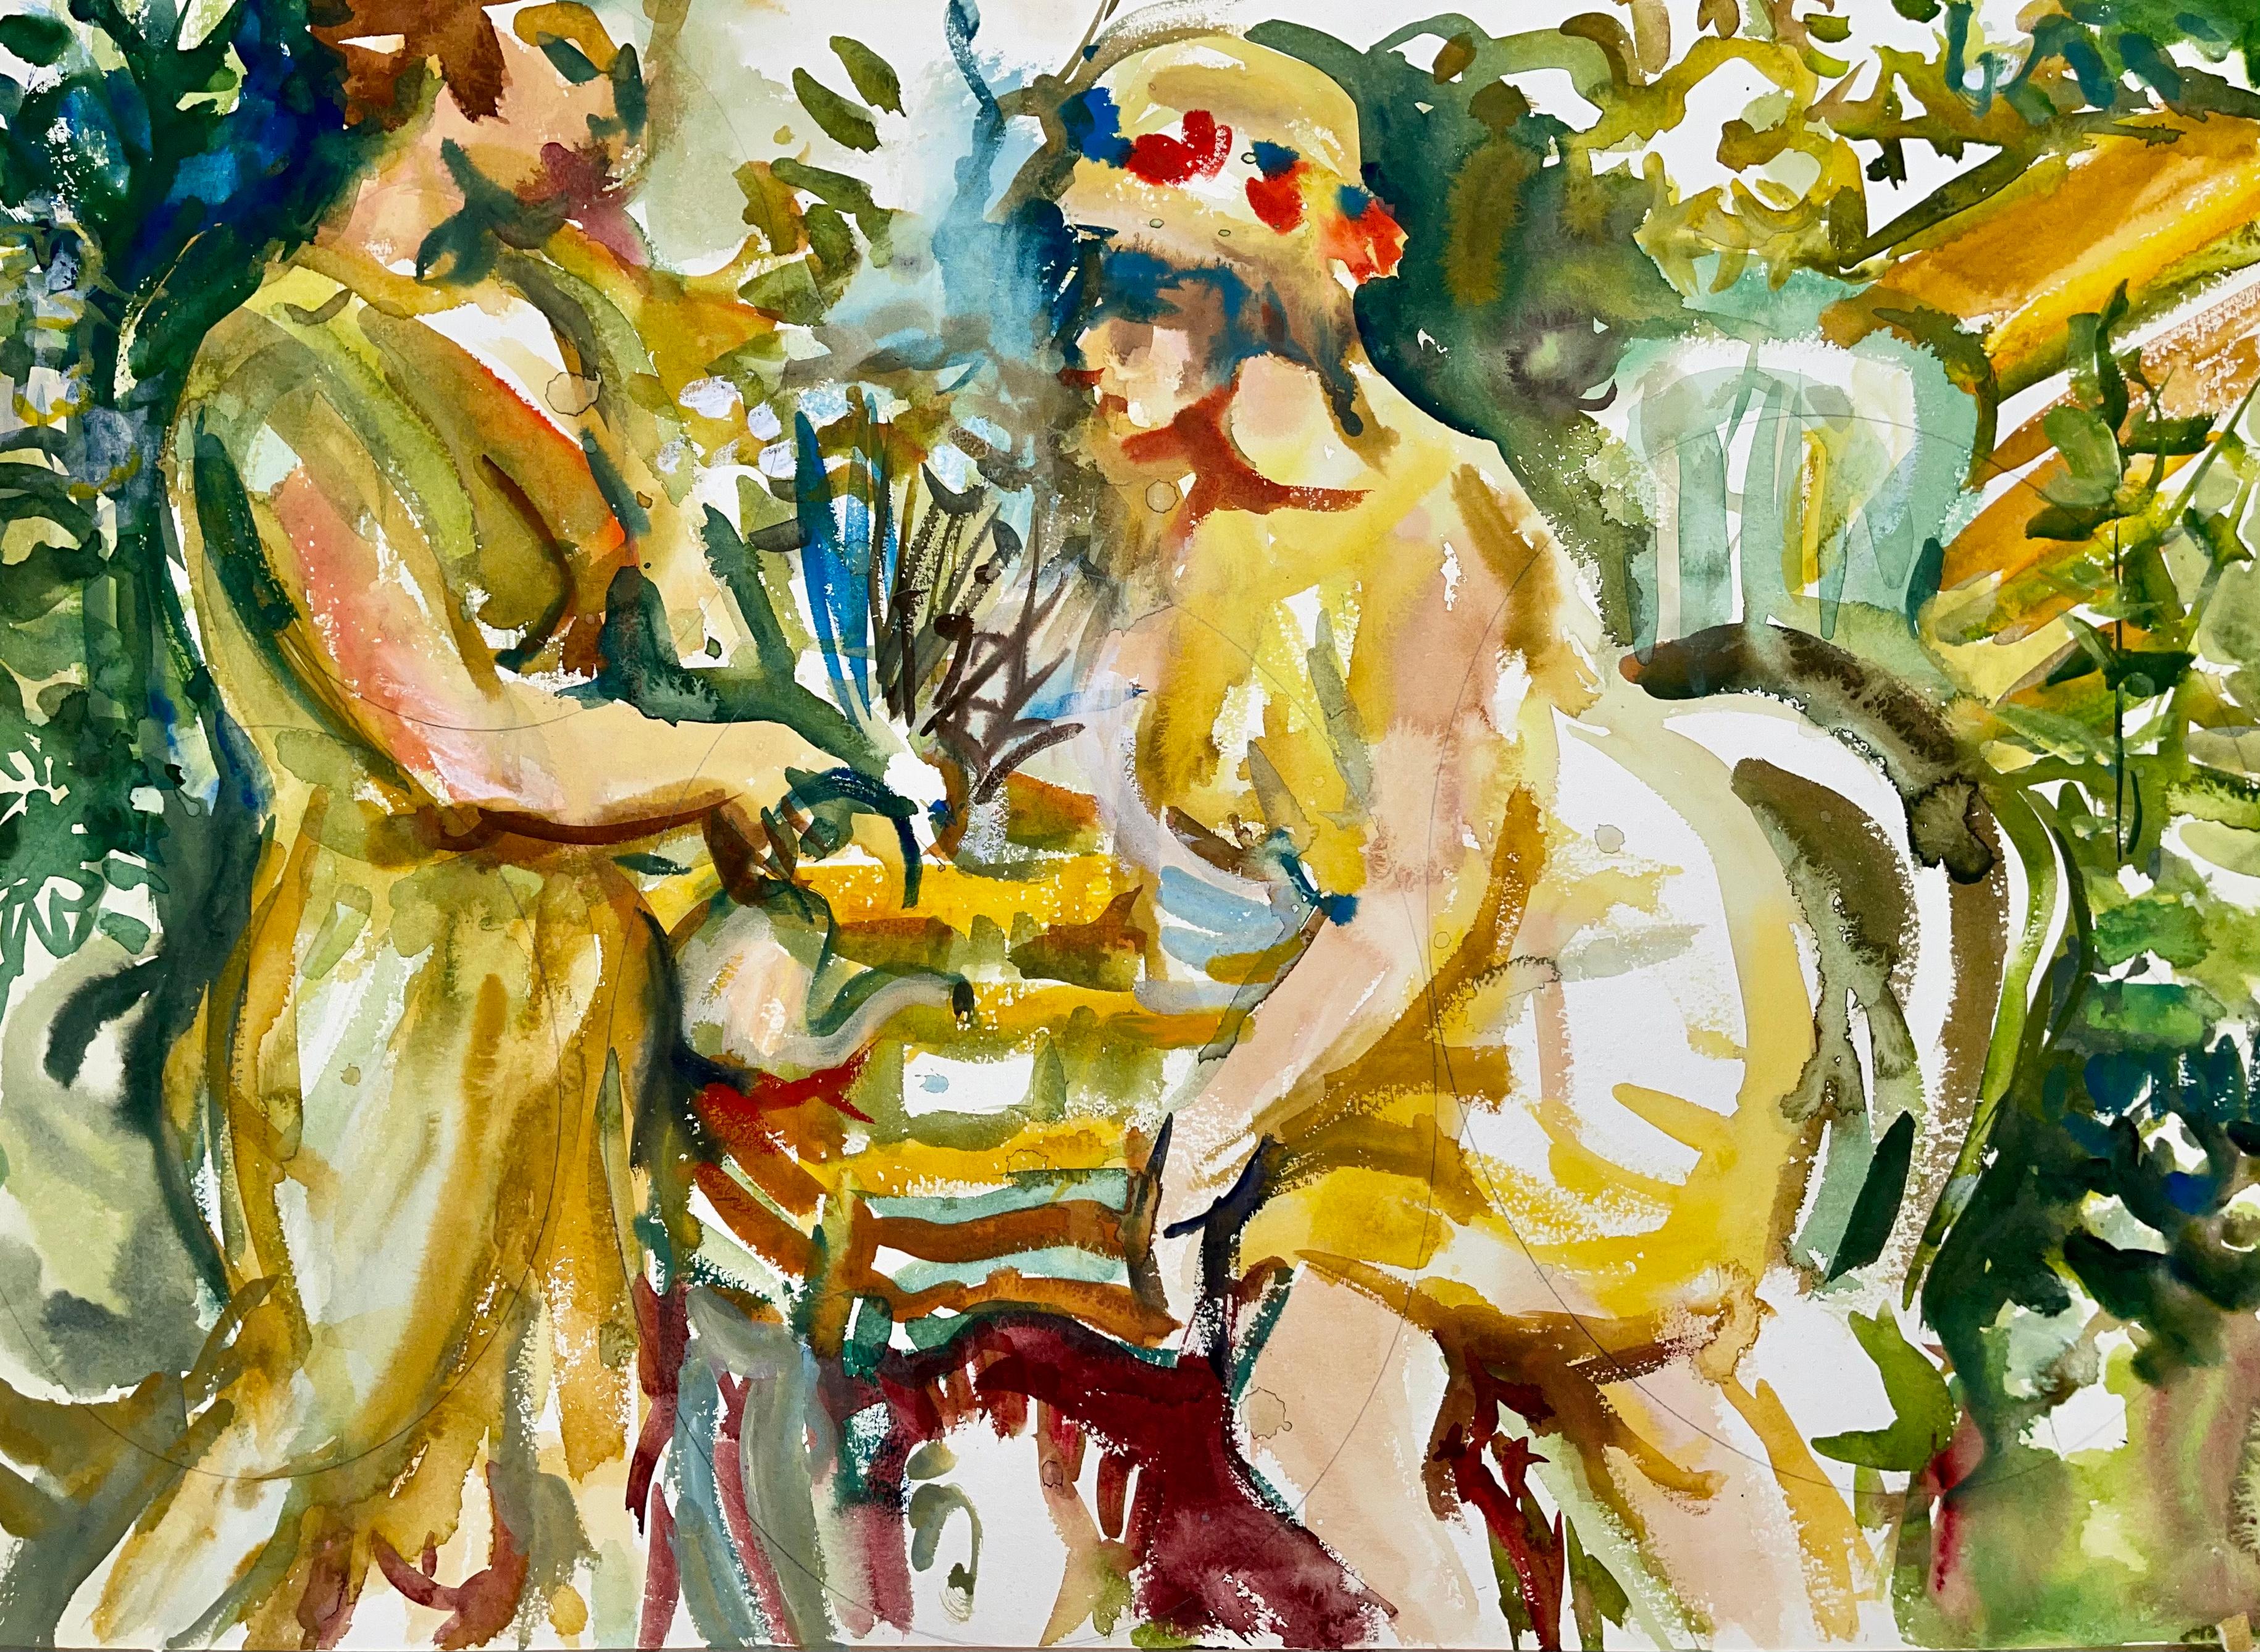 Ian Hornak Figurative Painting - Untitled (Abstract Figures with Flowers)